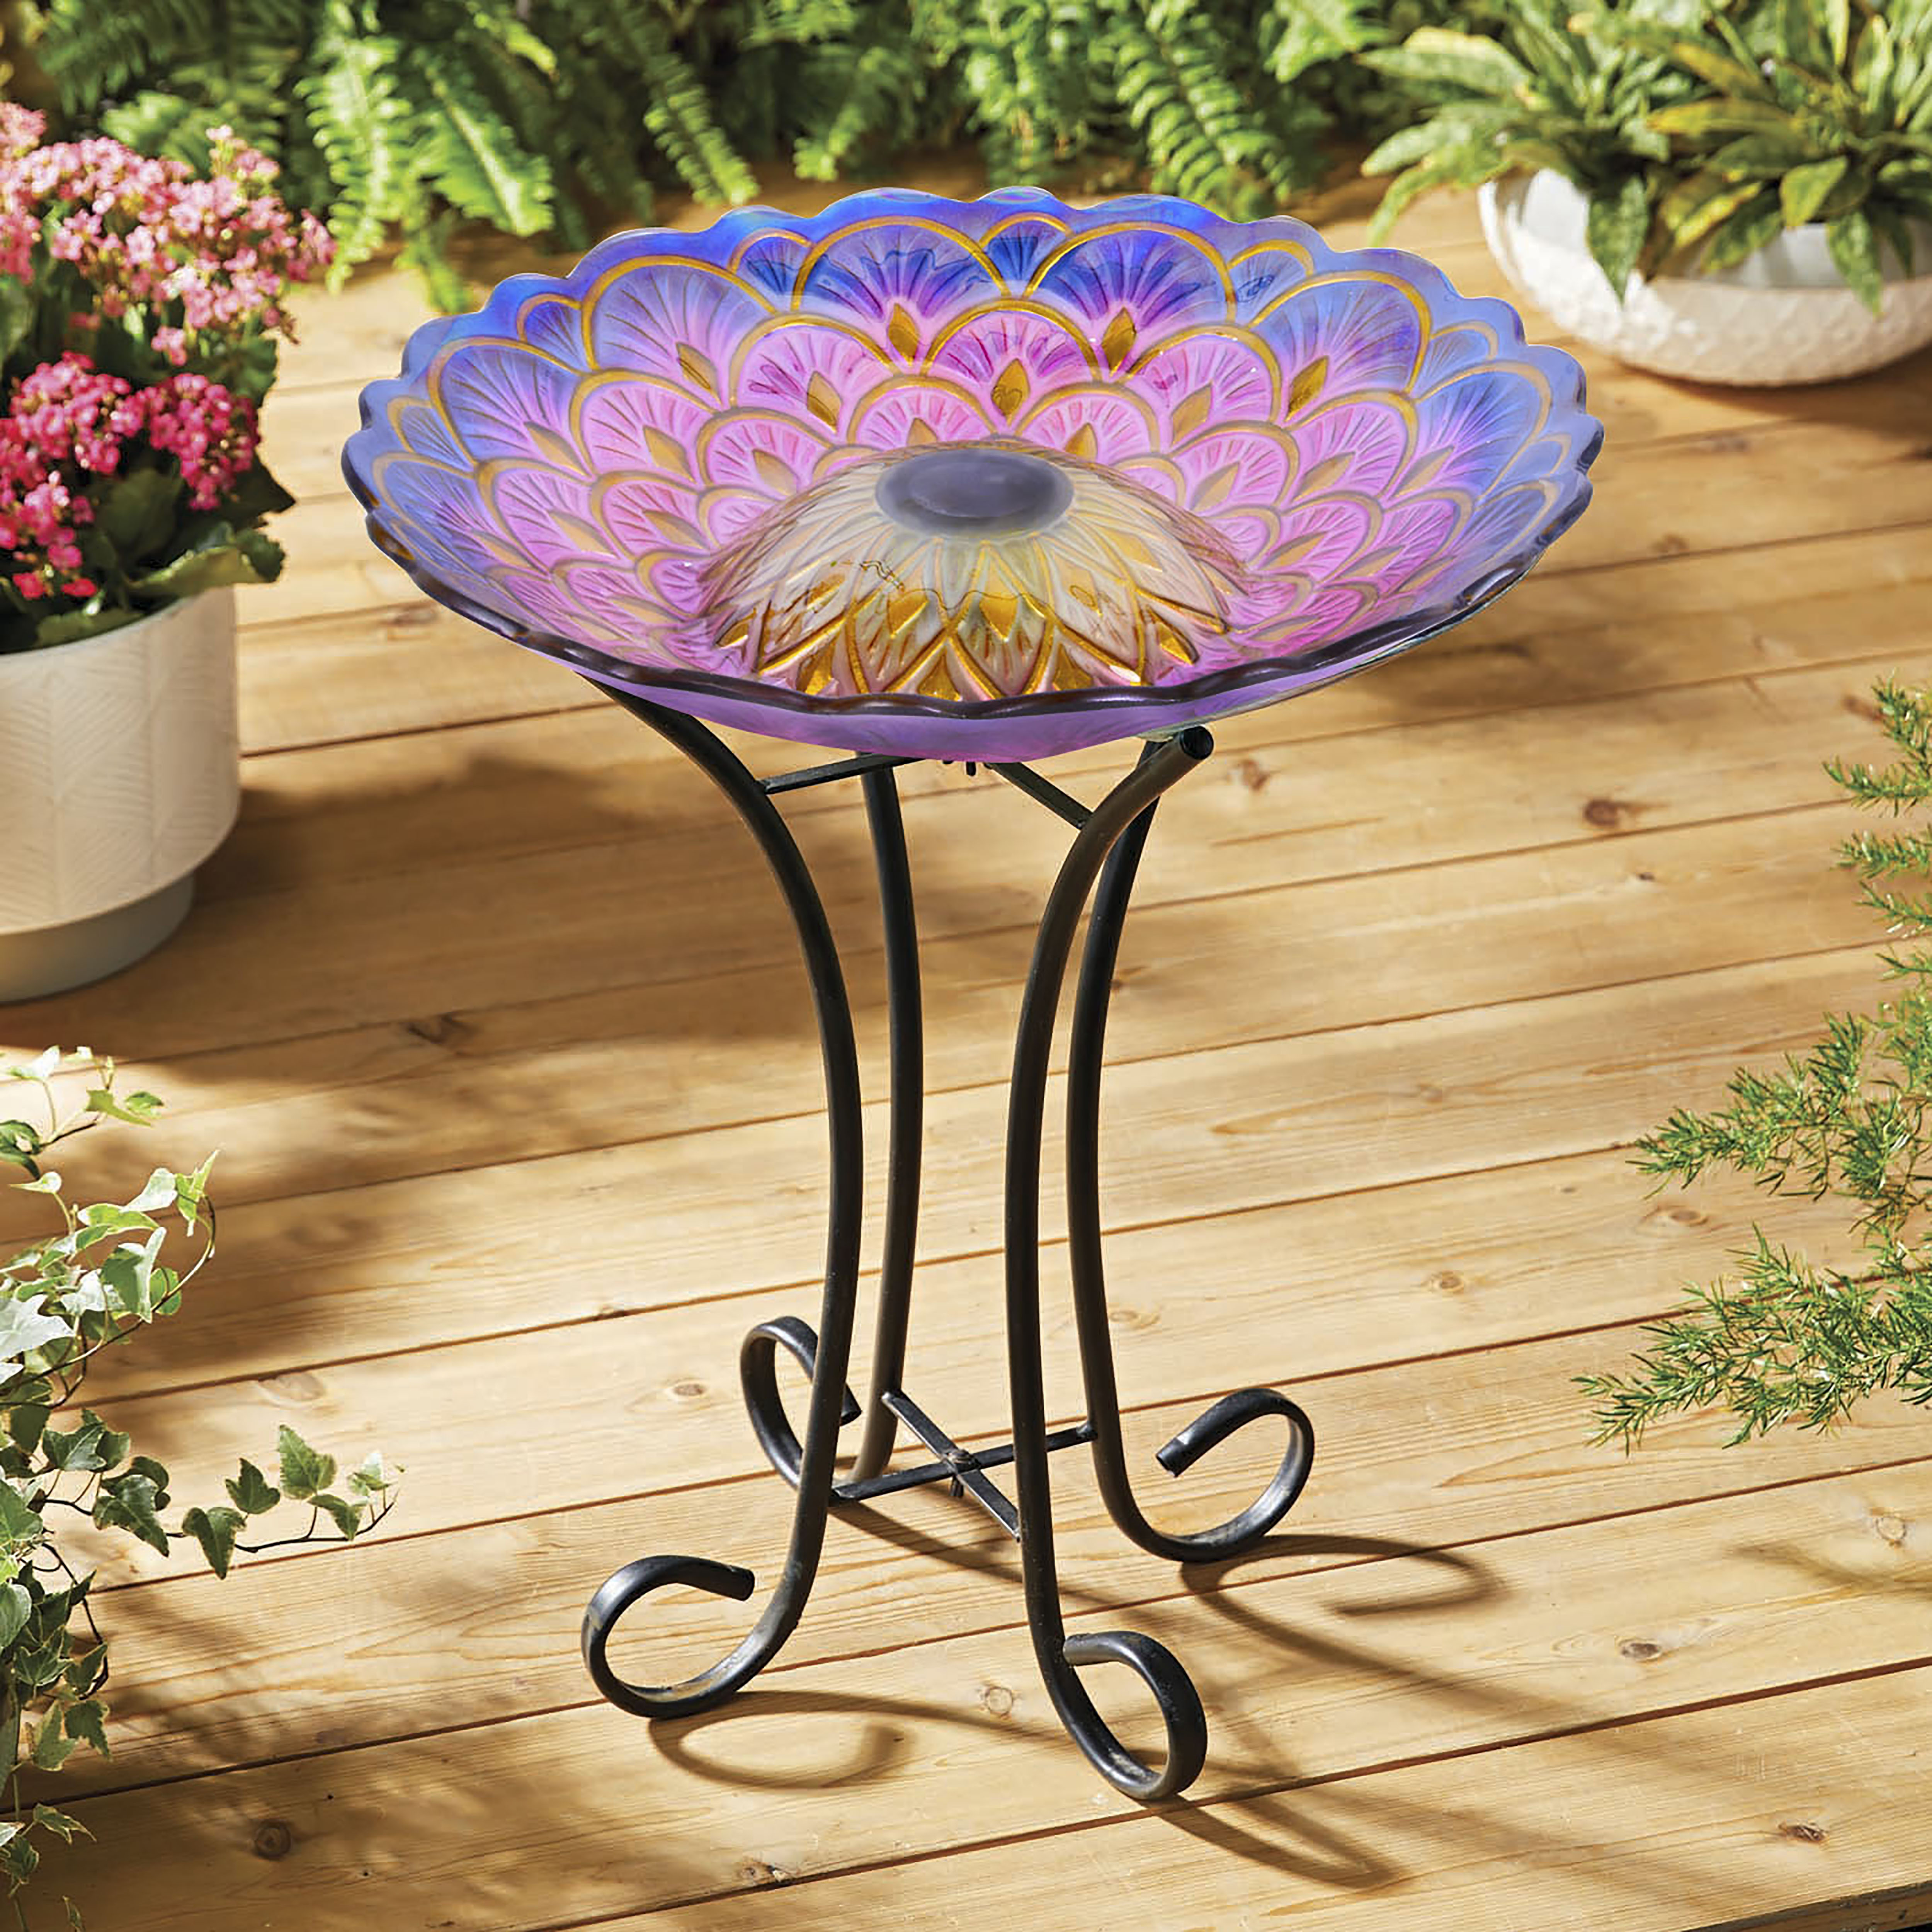 Hi-Line Gift 78415-H Solar Floral Glass Bird Bath with Stand - image 1 of 5